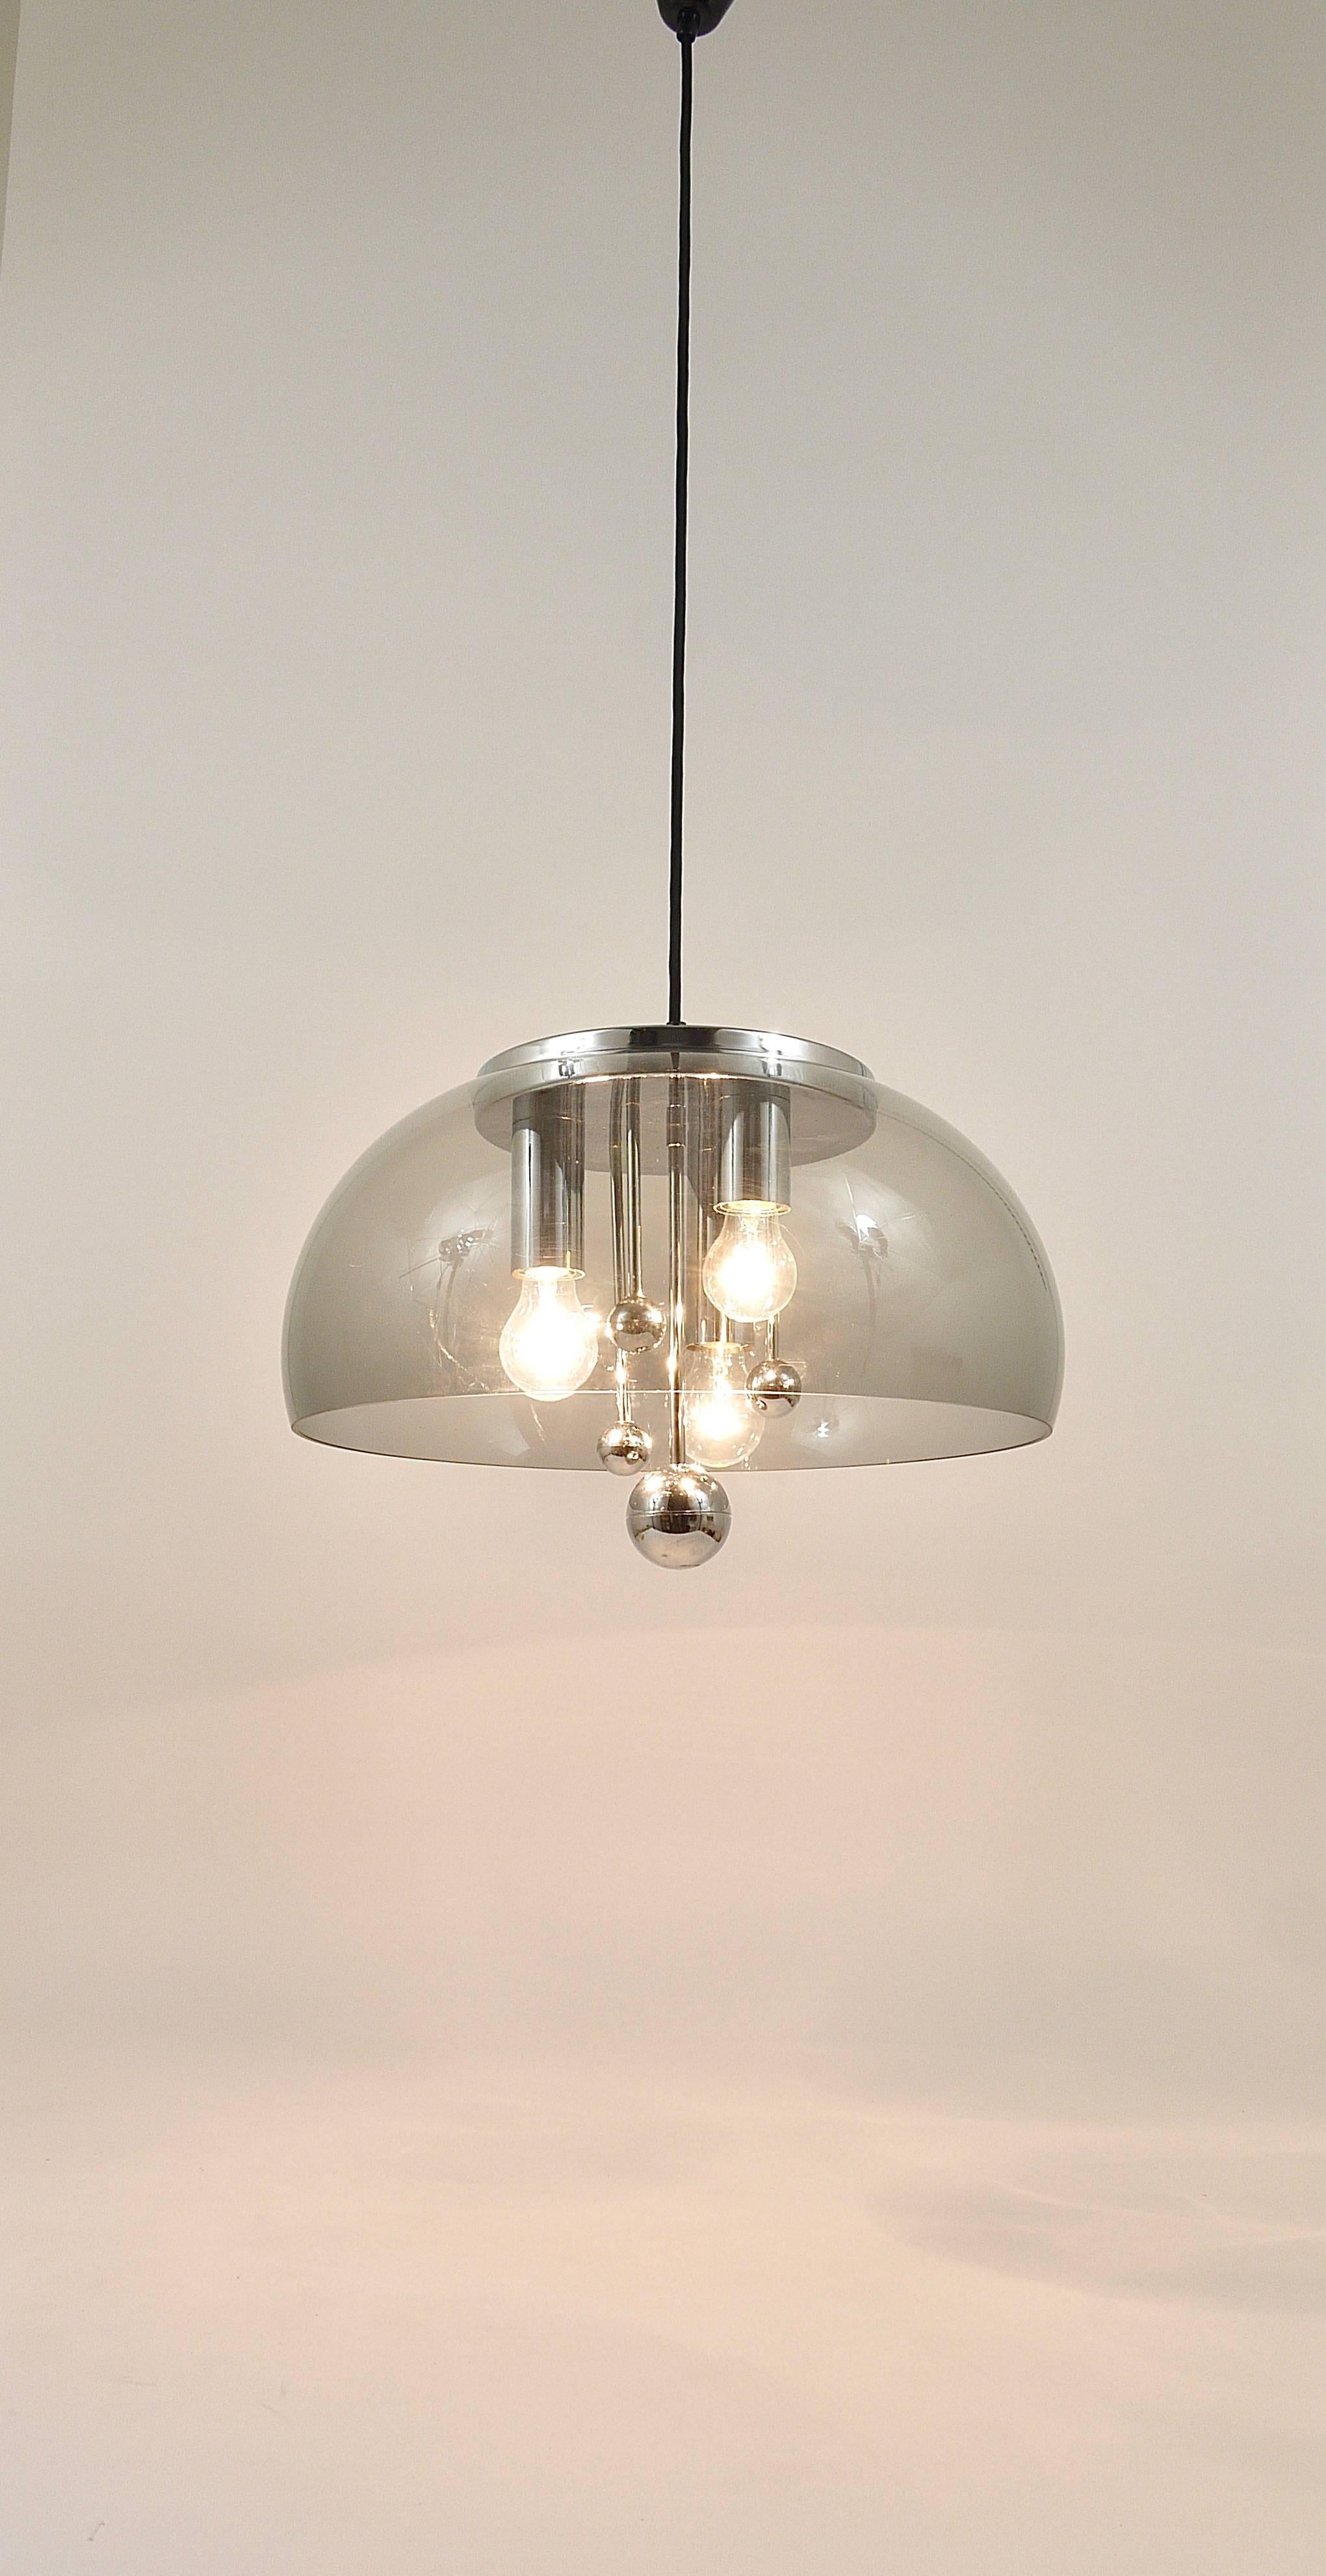 A beautiful completely chrome-plated ceiling light with a large light-grey smoked acrylic hemisphere lampshade and nice chromed ornamental globes inside. Made in Germany in the 1970s. Has three light sources and is in very condition with very